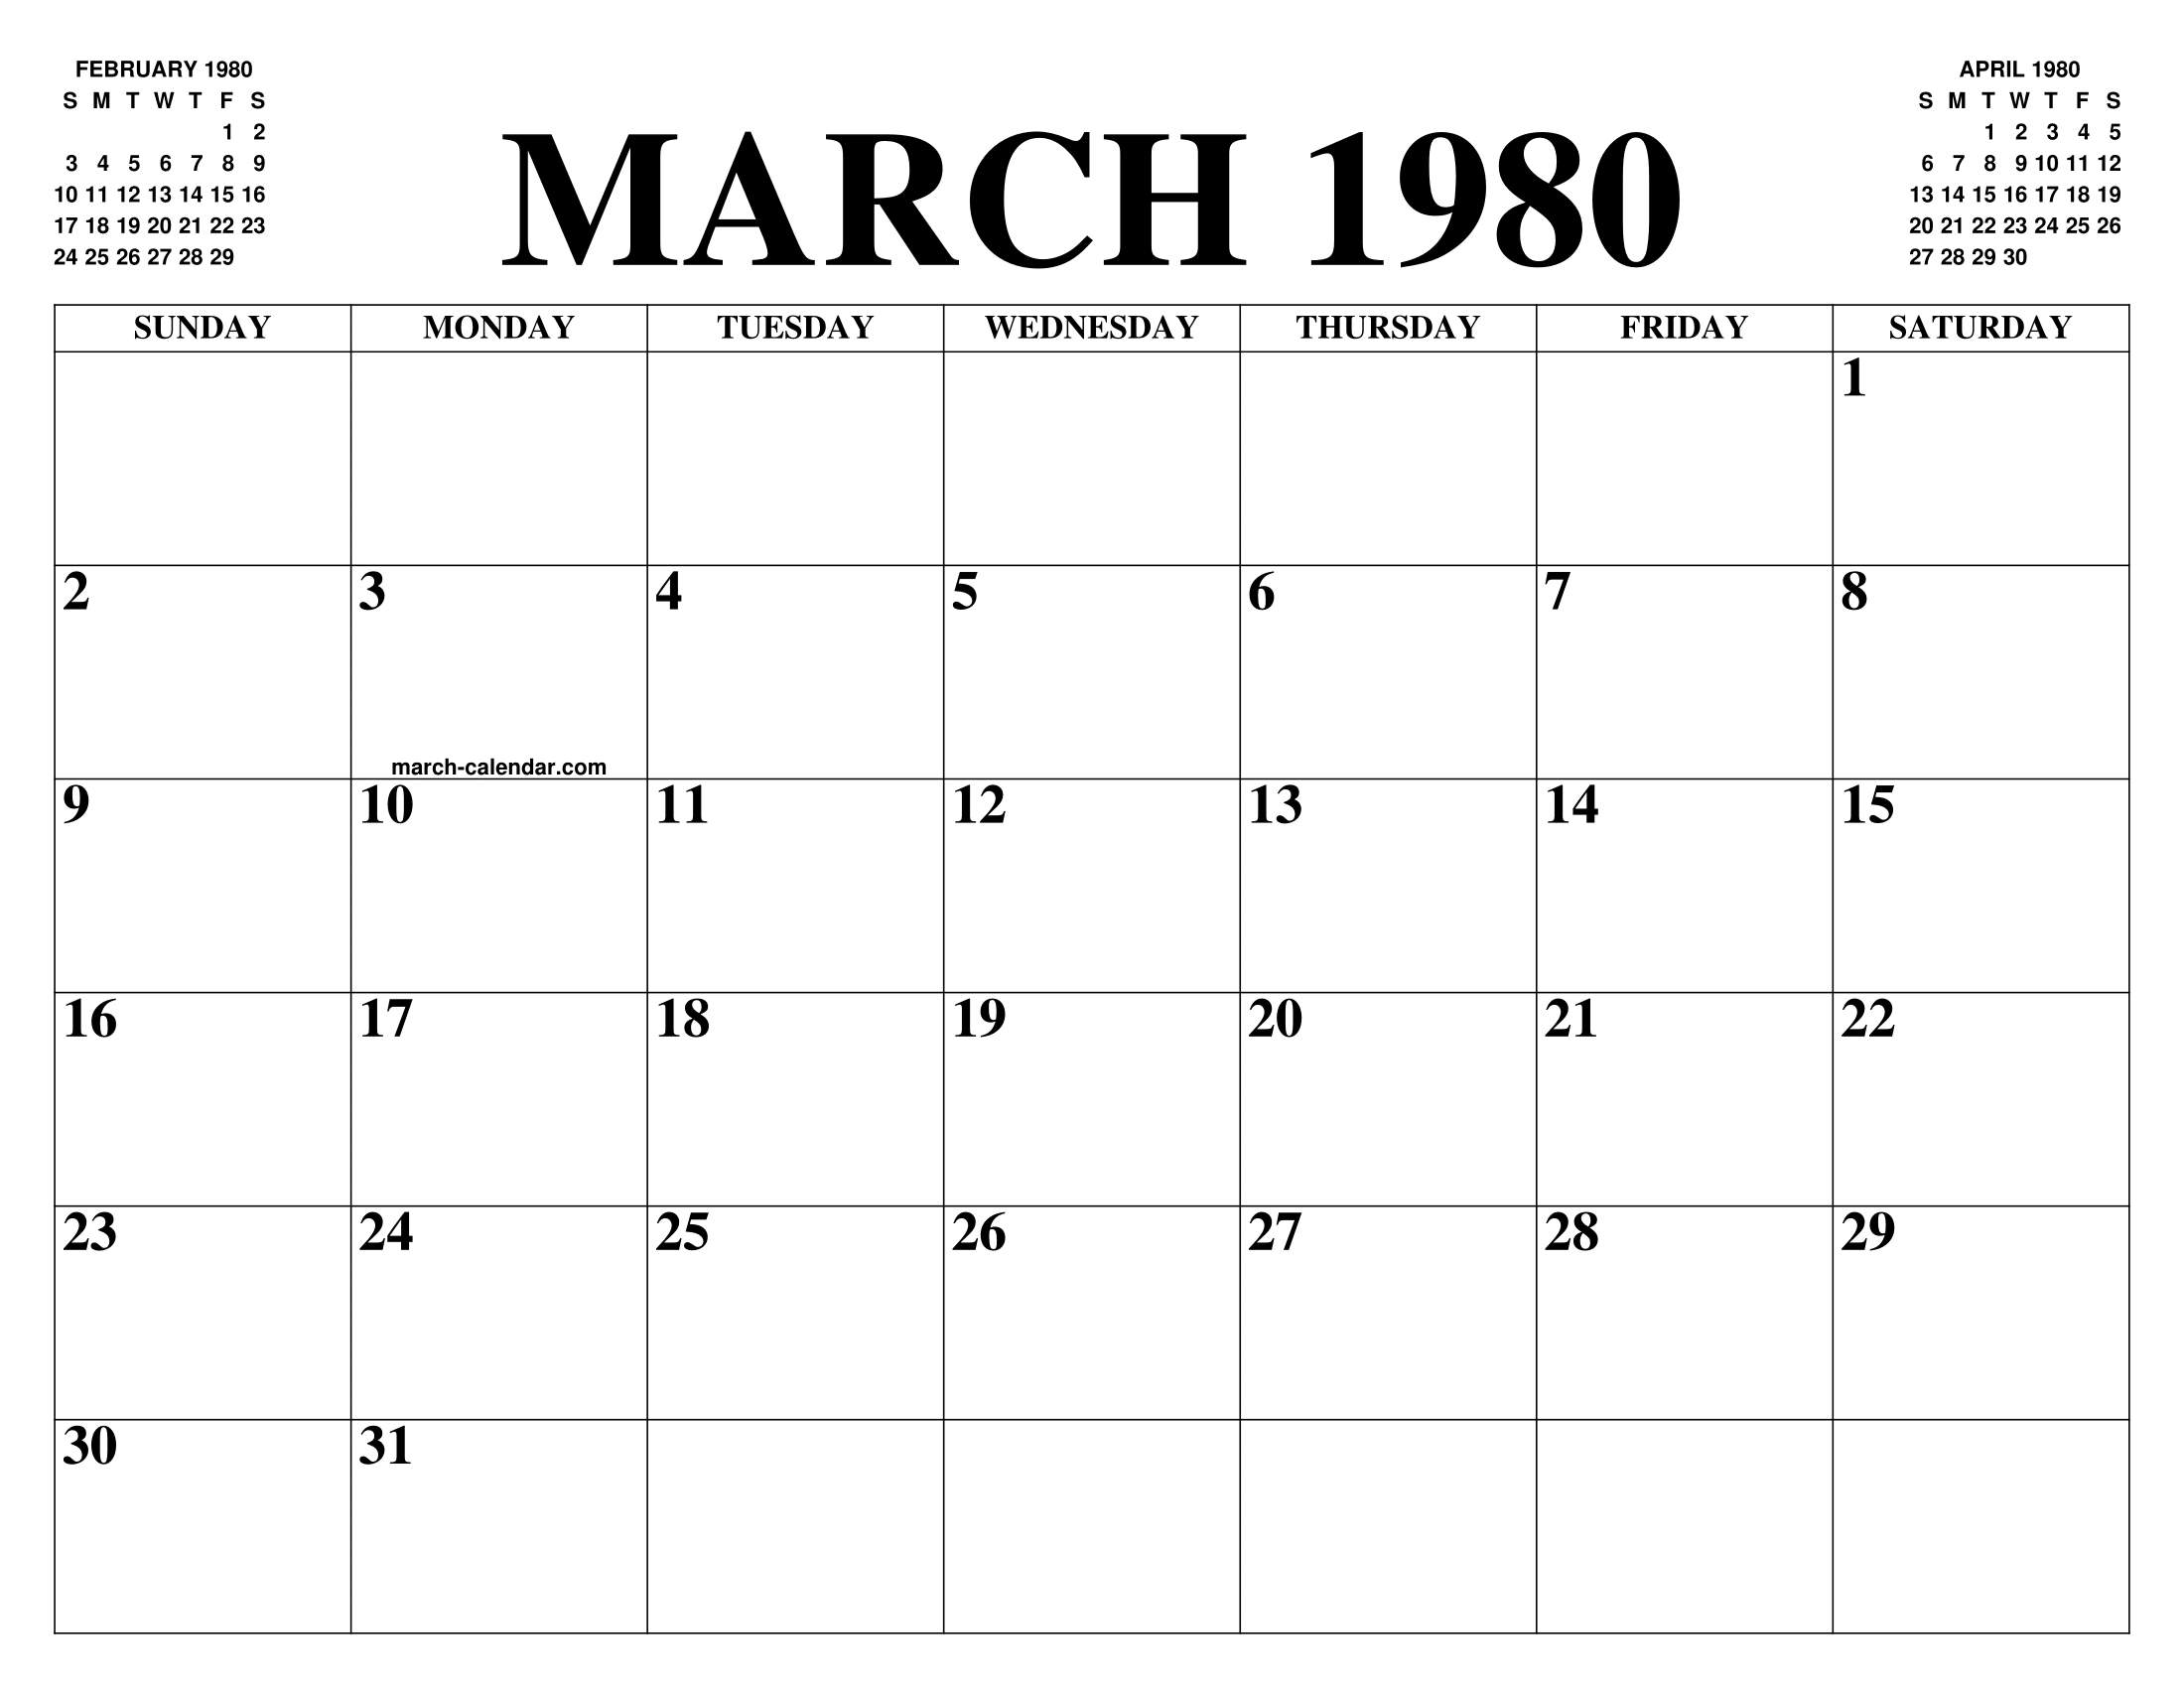 MARCH 1980 CALENDAR OF THE MONTH: FREE PRINTABLE MARCH CALENDAR OF THE